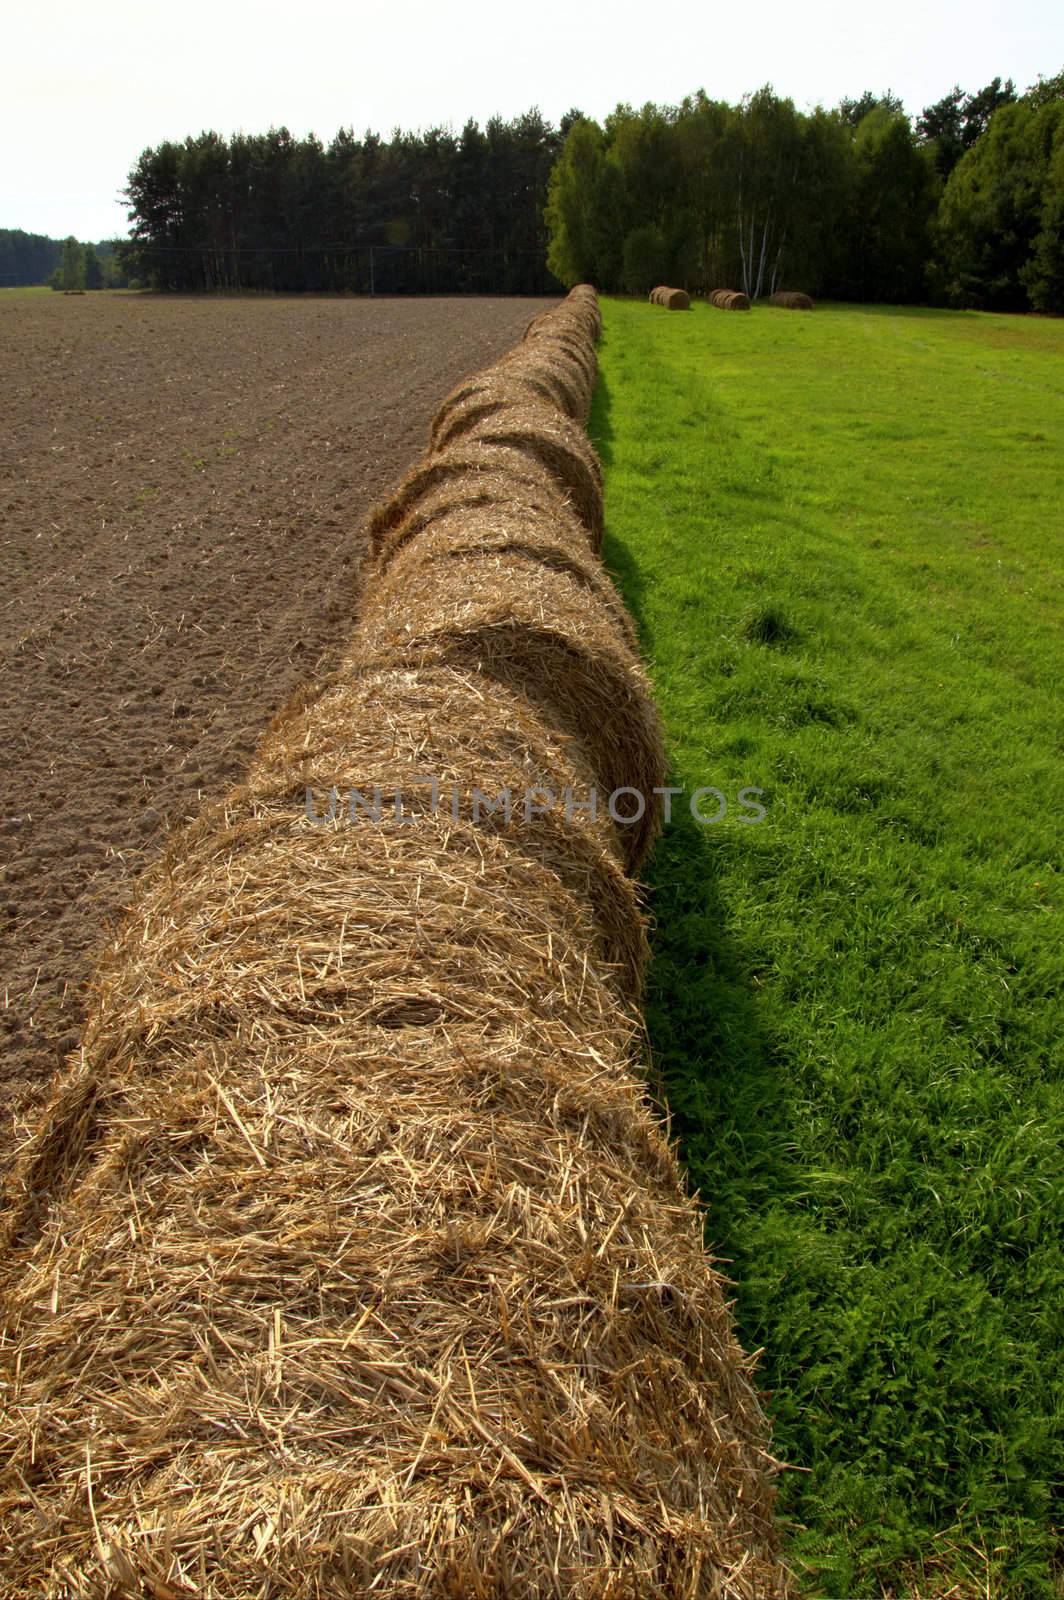 This photo present bales of straw after harvest grain HDR.